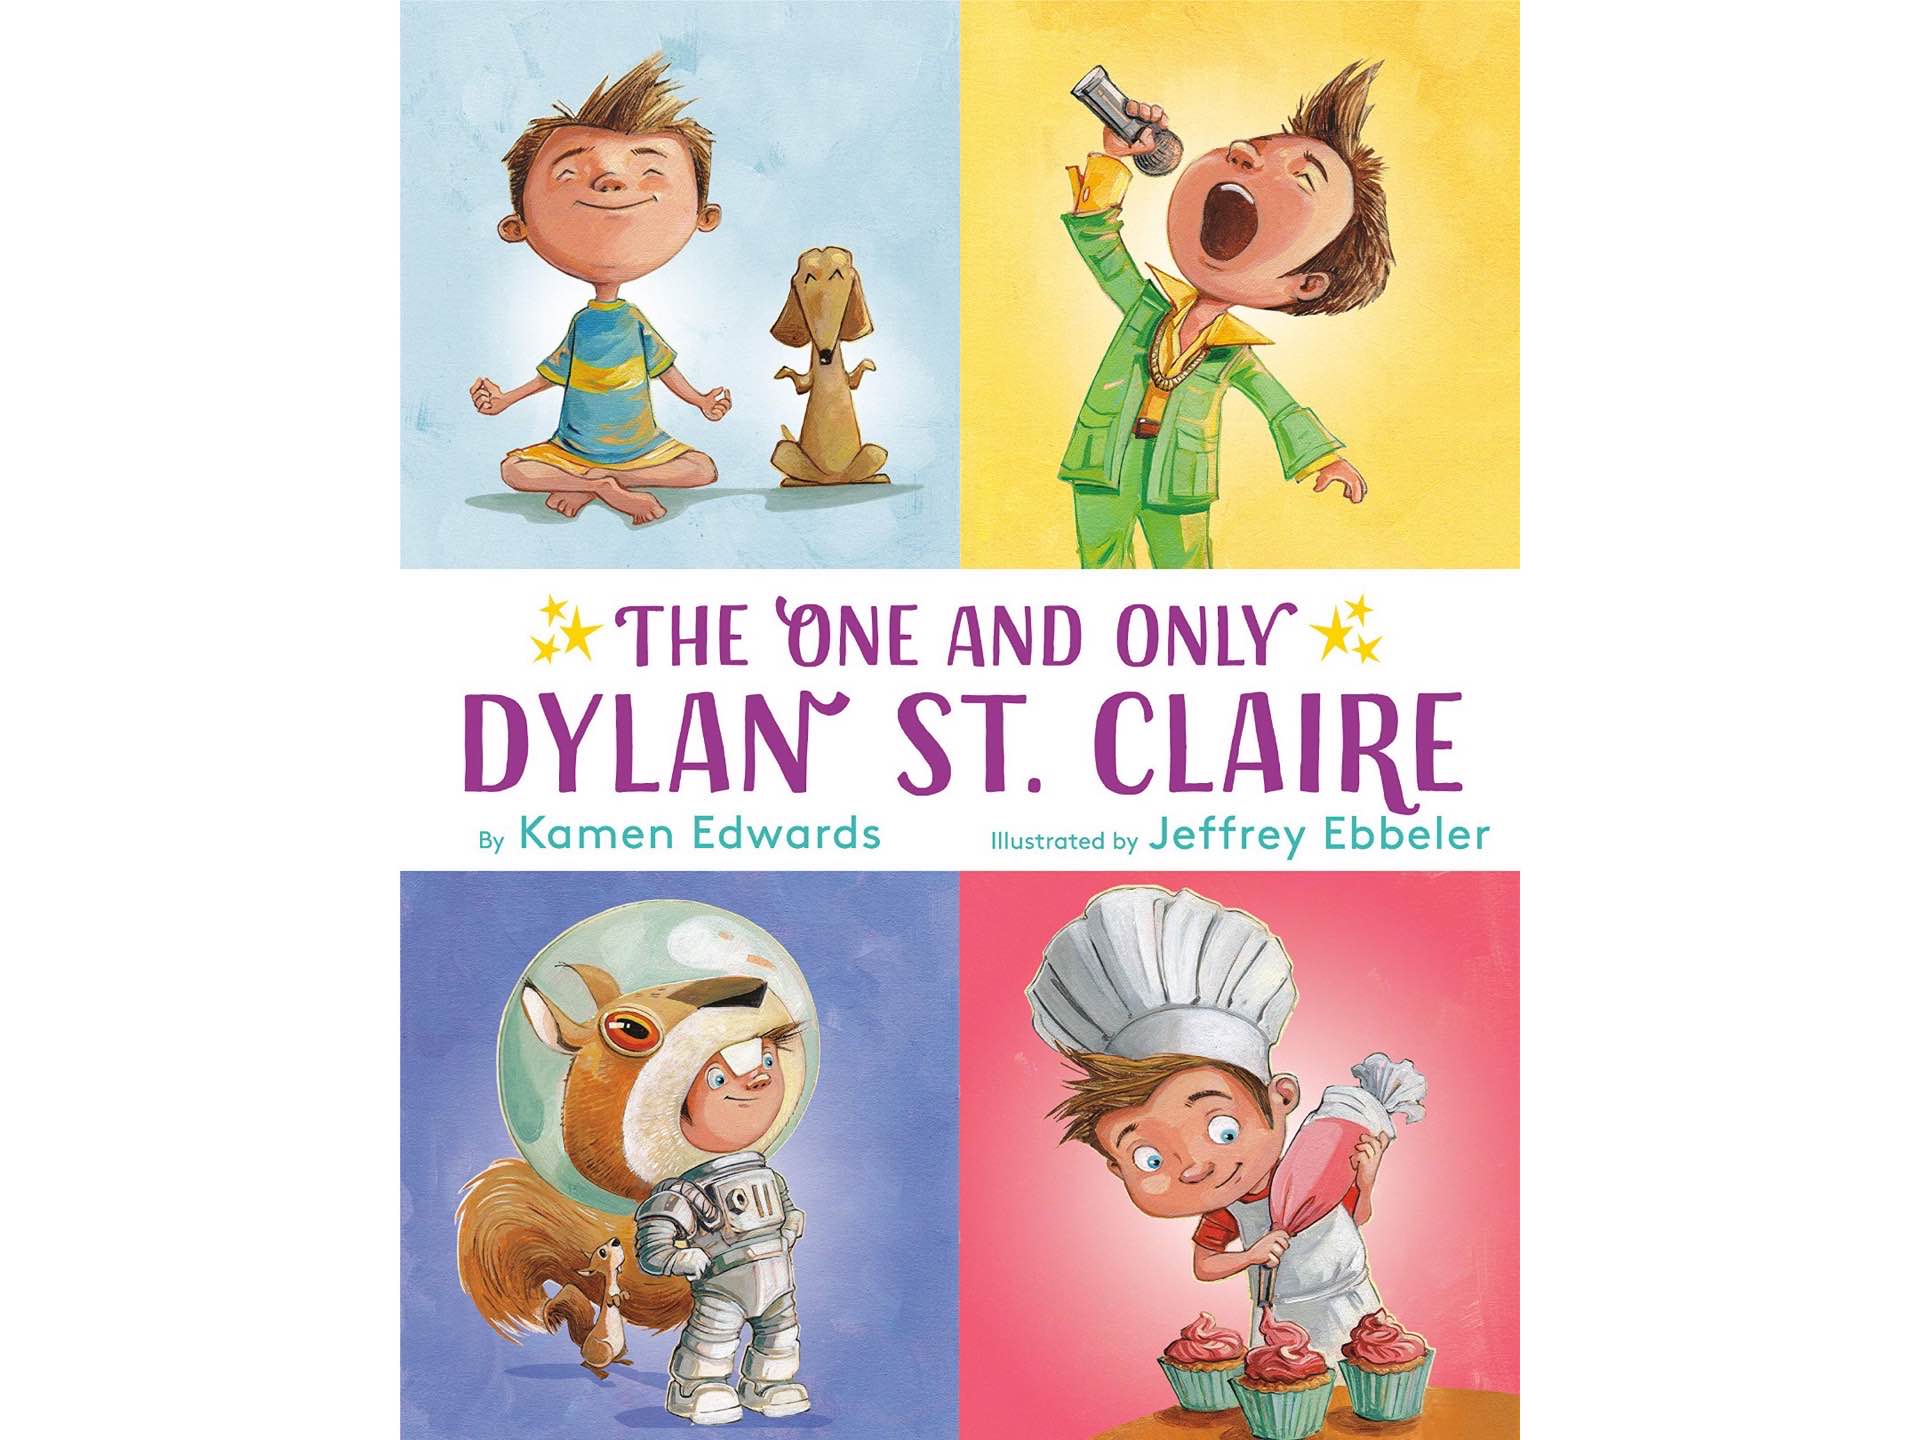 the-one-and-only-dylan-st-claire-by-kamen-edwards-and-jeffrey-ebbeler